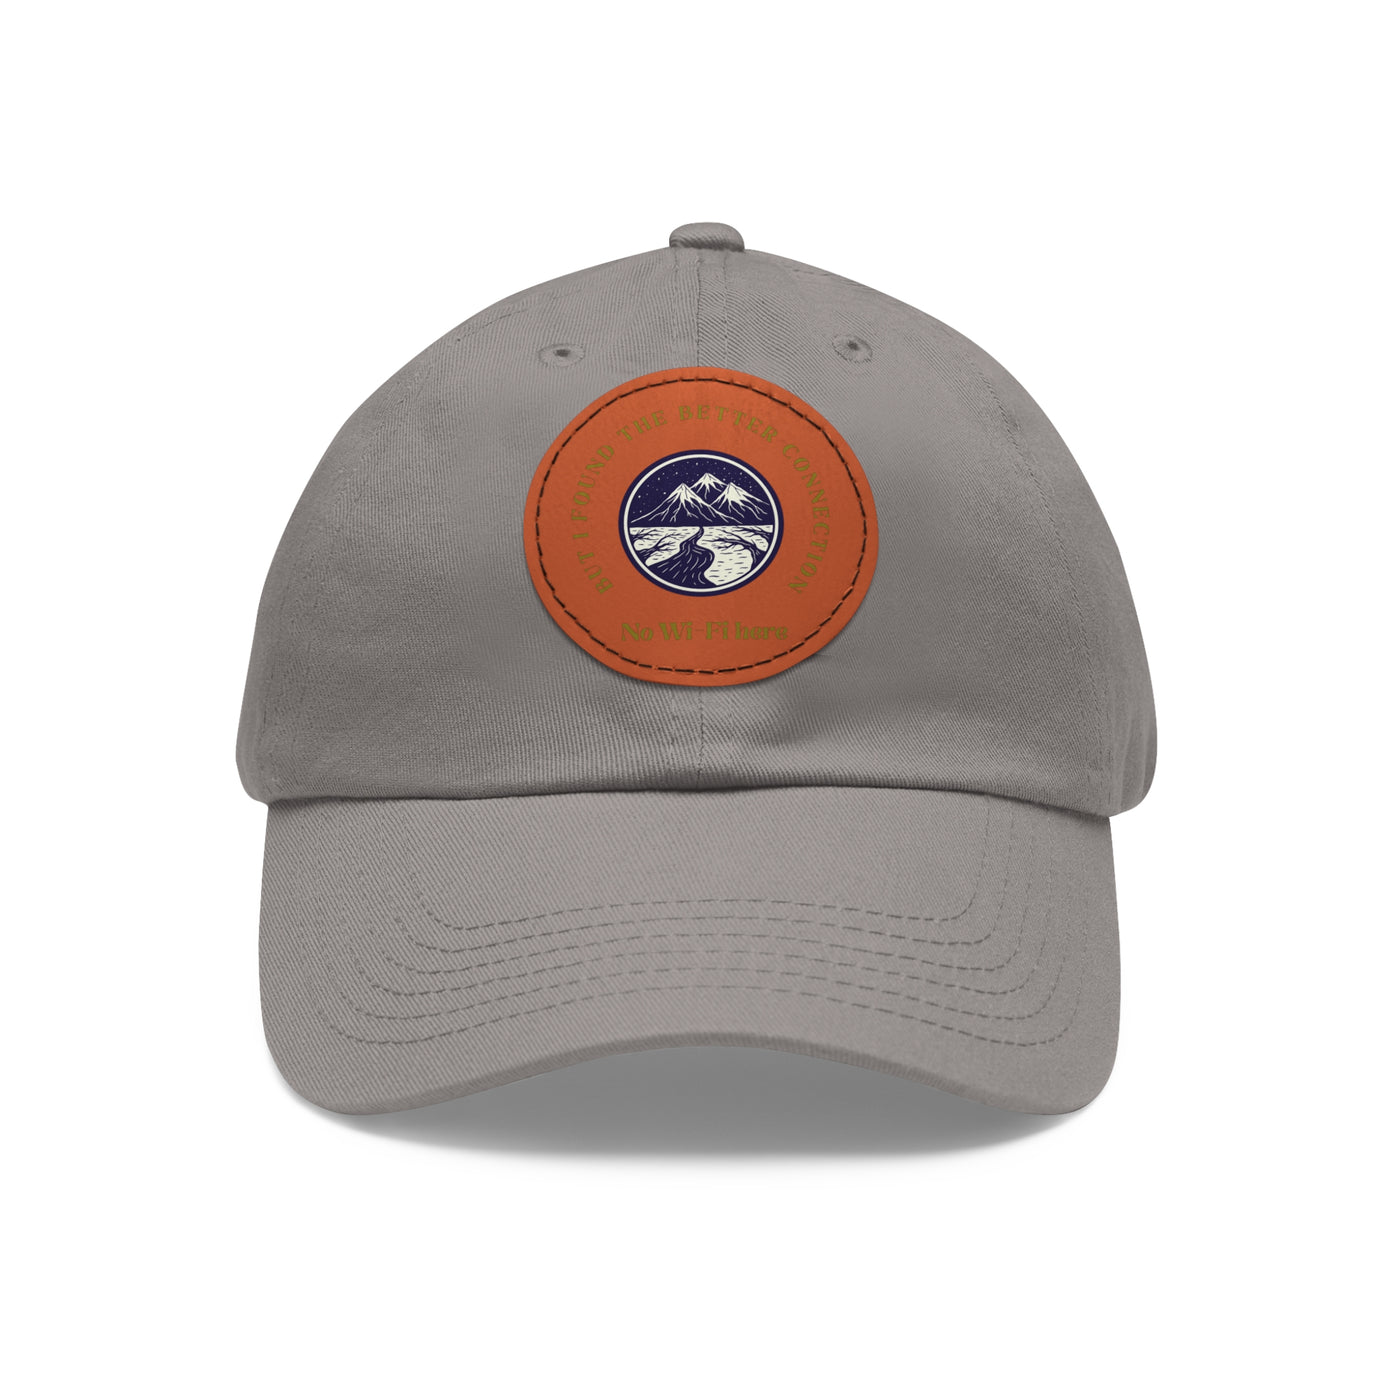 Leather Patch Hats | Low Profile Dad Hats | Let's Travel